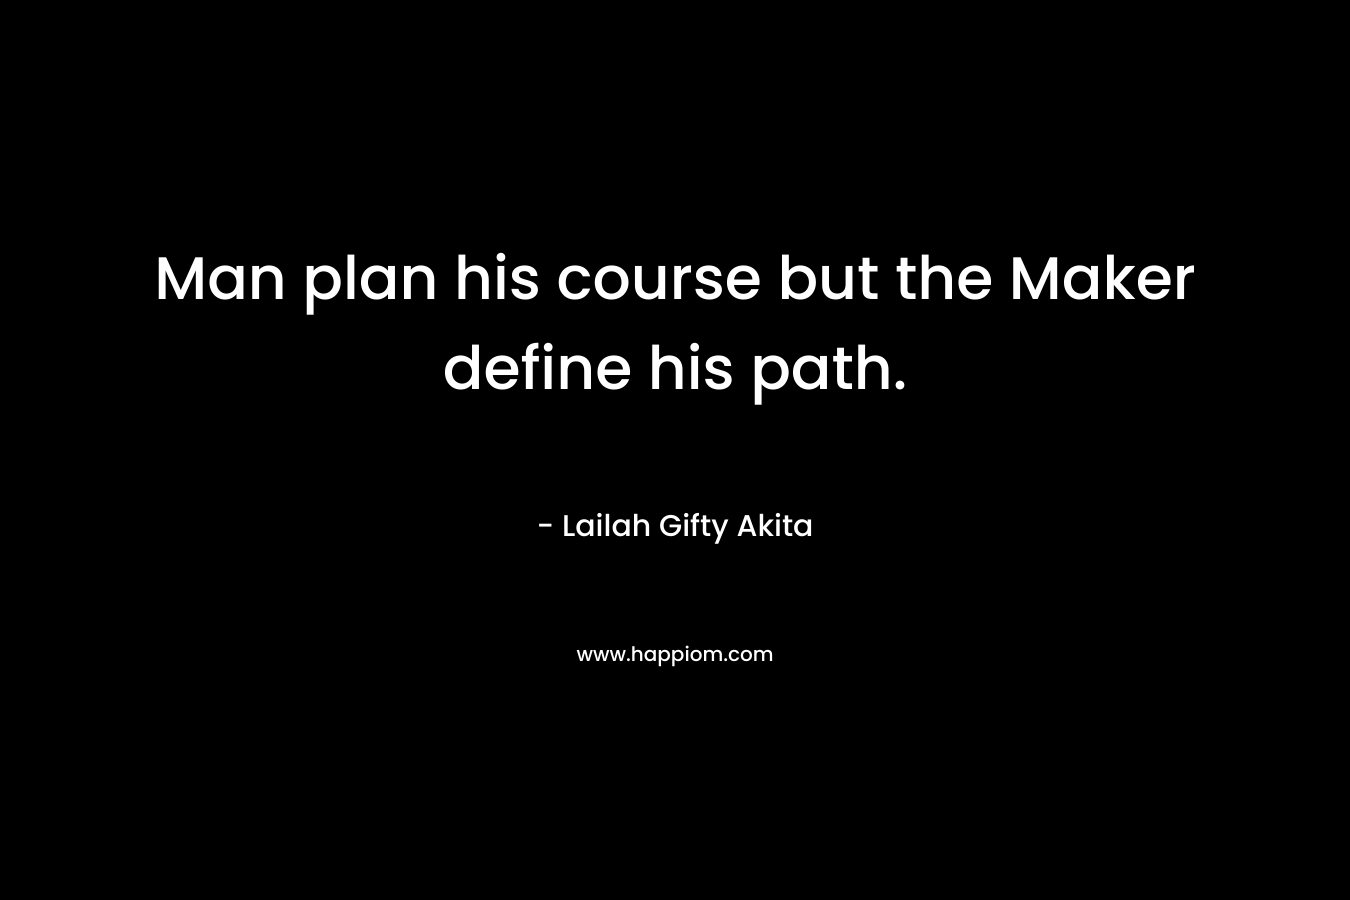 Man plan his course but the Maker define his path. – Lailah Gifty Akita